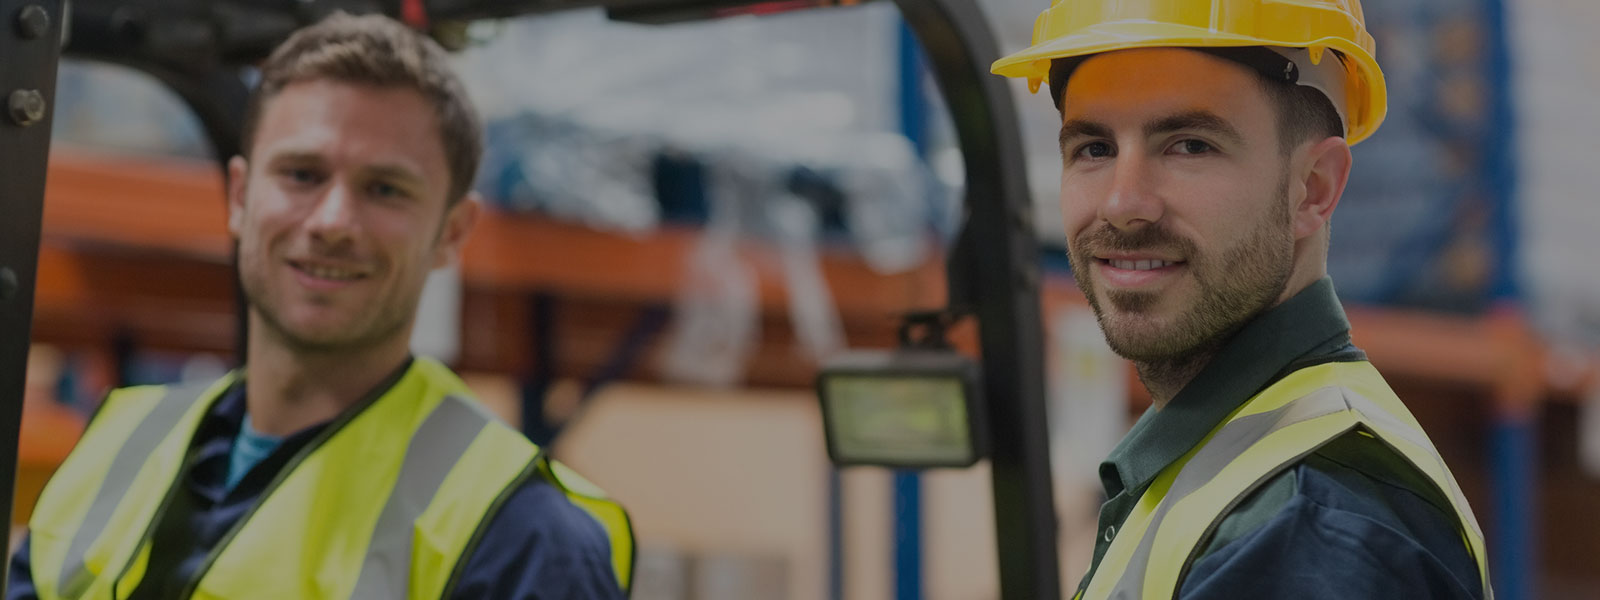 Forklift Safety Training & Certification, Scarborough